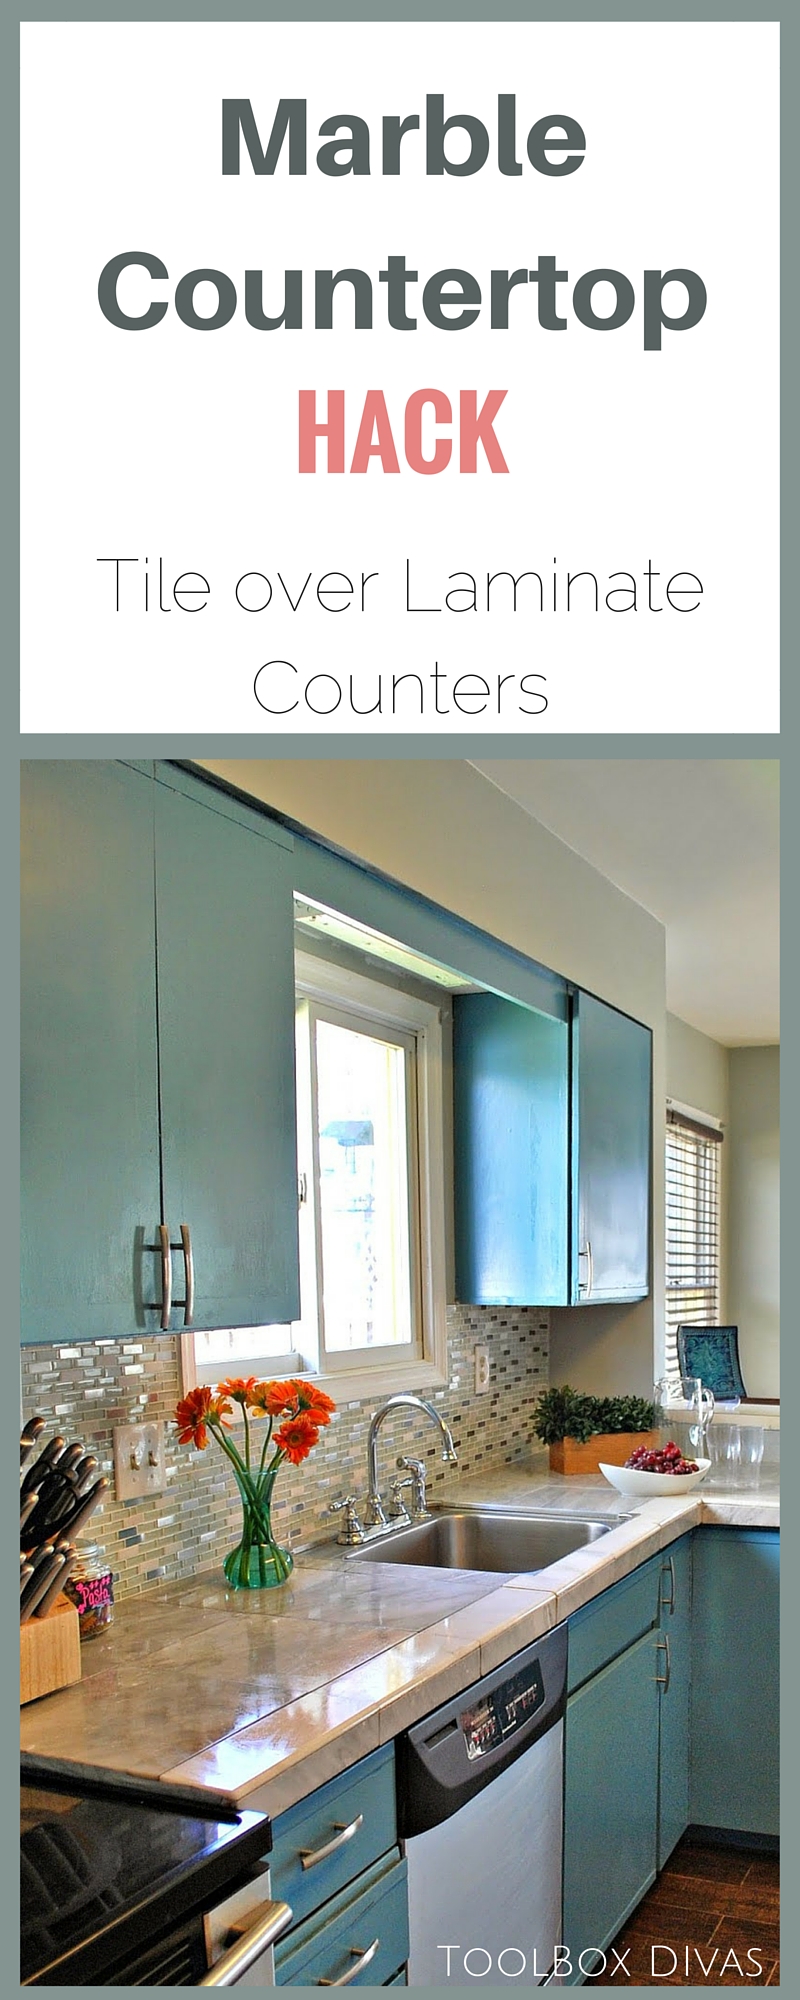 Tile Over Laminate Countertops, How To Tile Over Existing Countertop